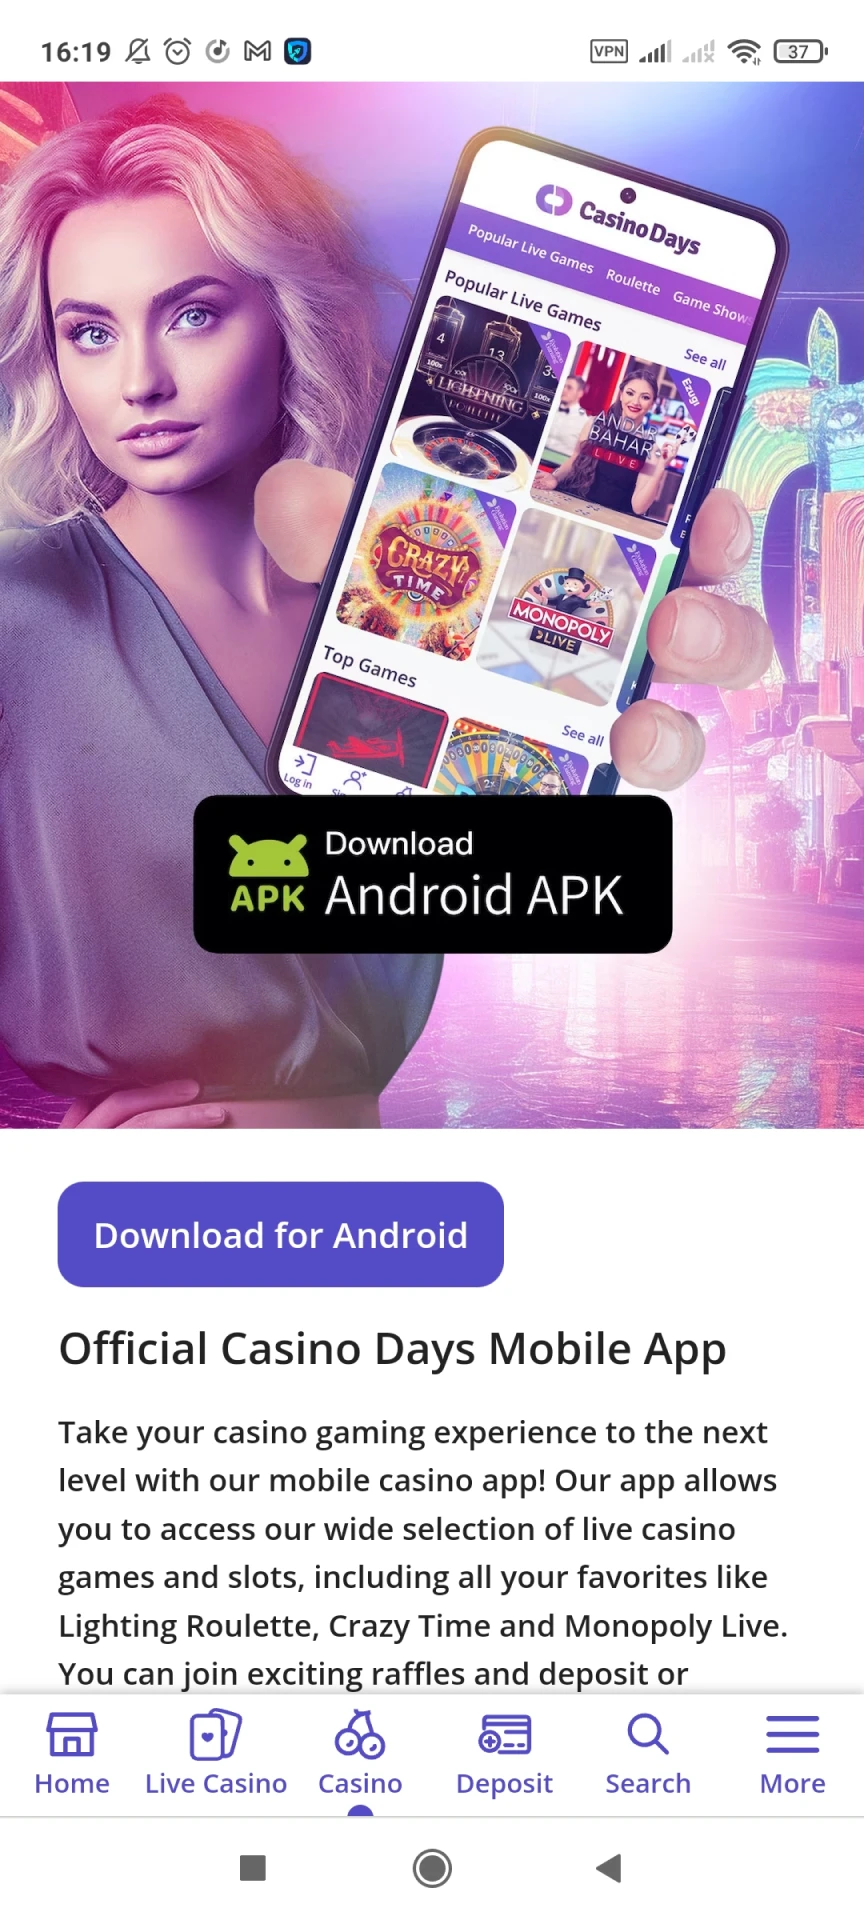 Start downloading the Casino Days app for Android.